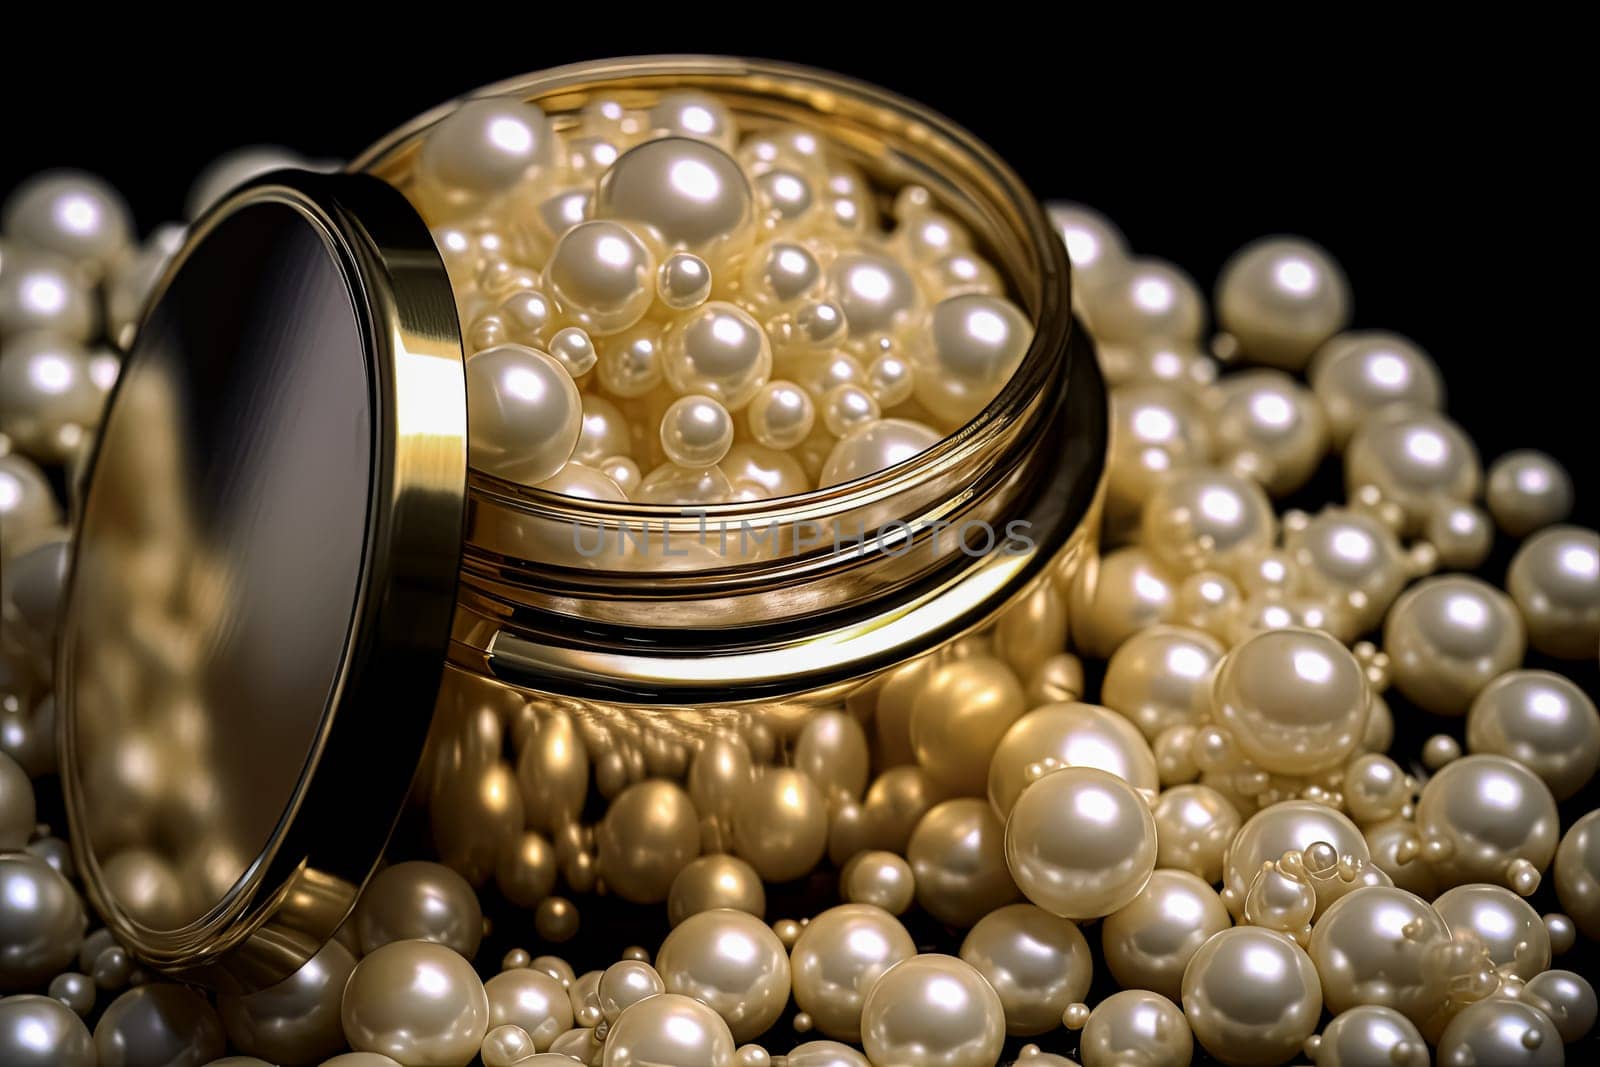 A gold-colored container filled with many white pearls, some scattered around it and others piled on top. Concept of luxury and elegance. Face cream in pearl form.